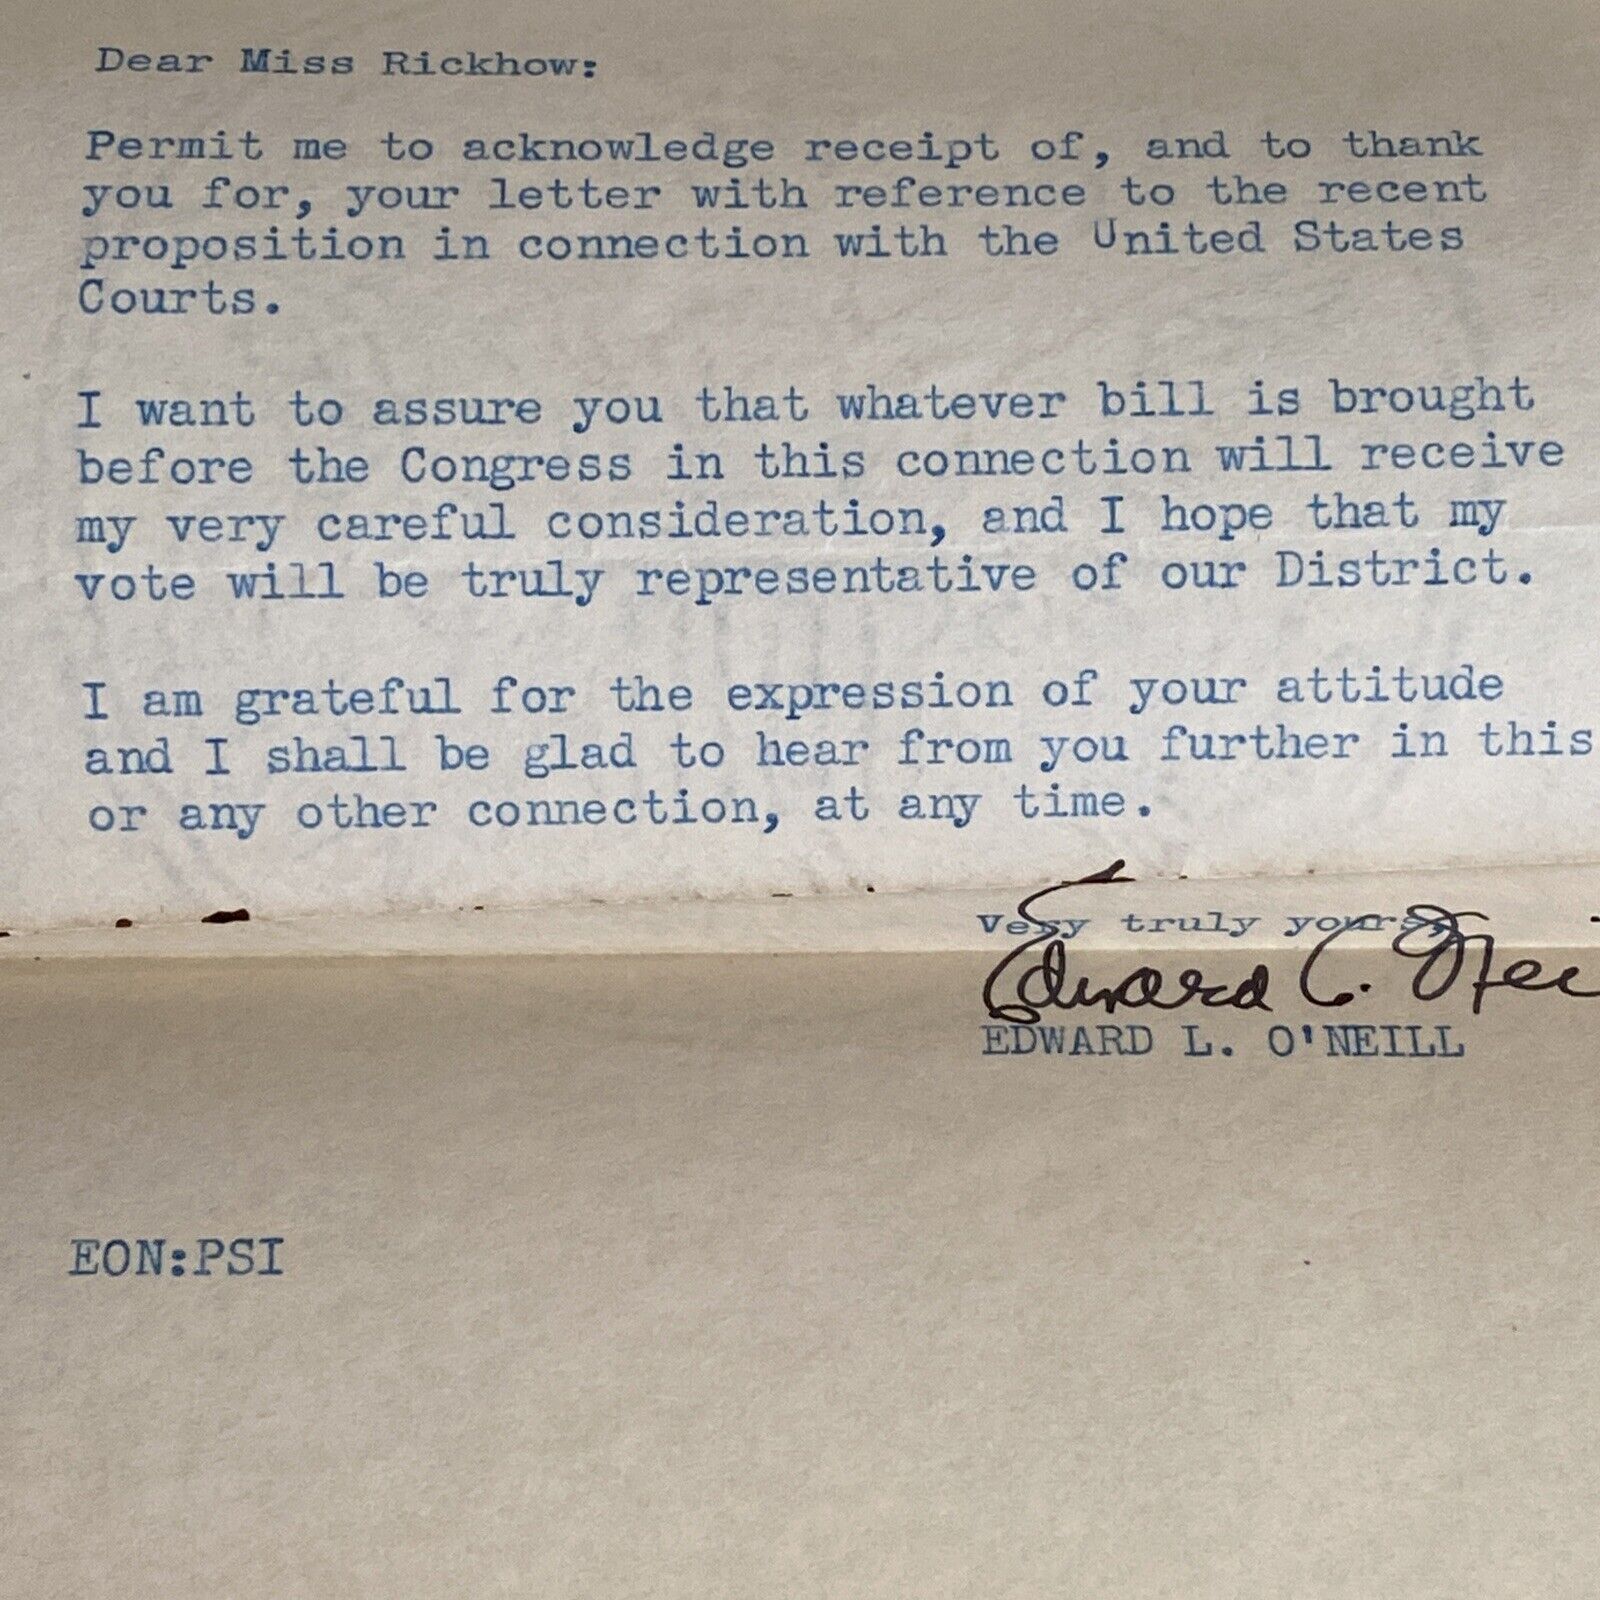 Edward L. O’Neill - House of Representatives Typed Letter - Feb. 9, 1937